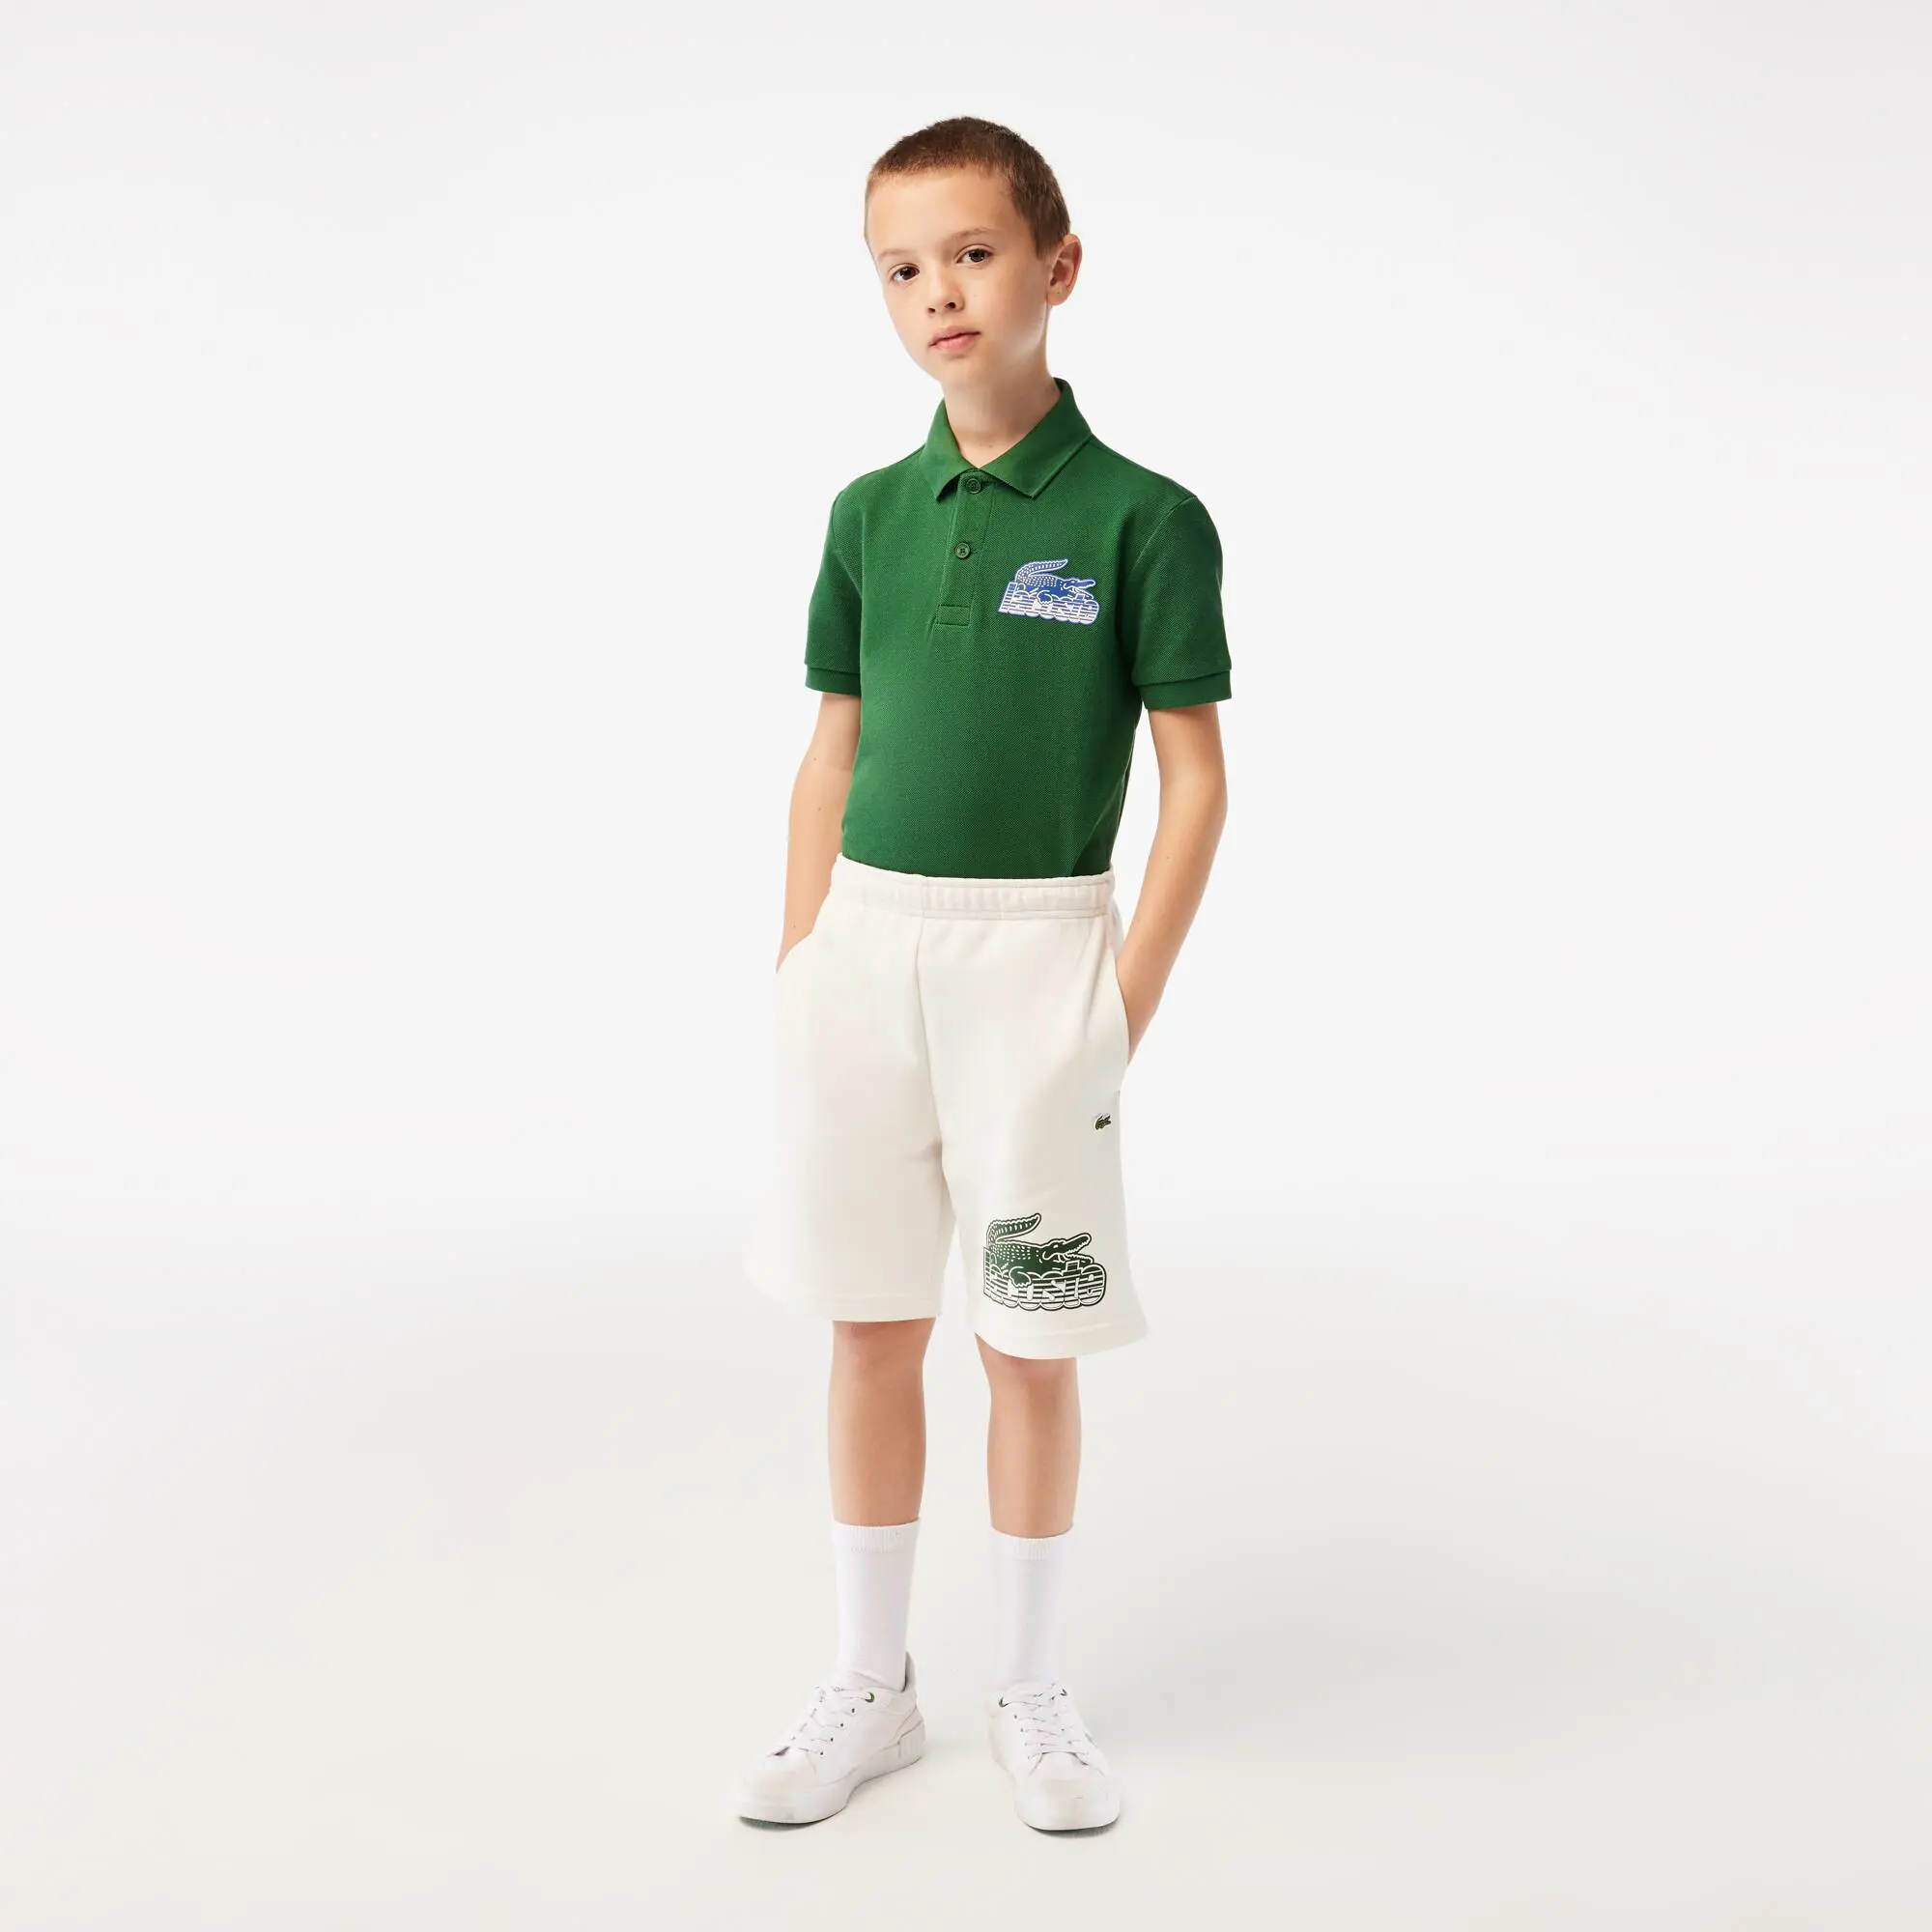 Lacoste Boys’ Lacoste Contrast Print Branded Shorts. 1